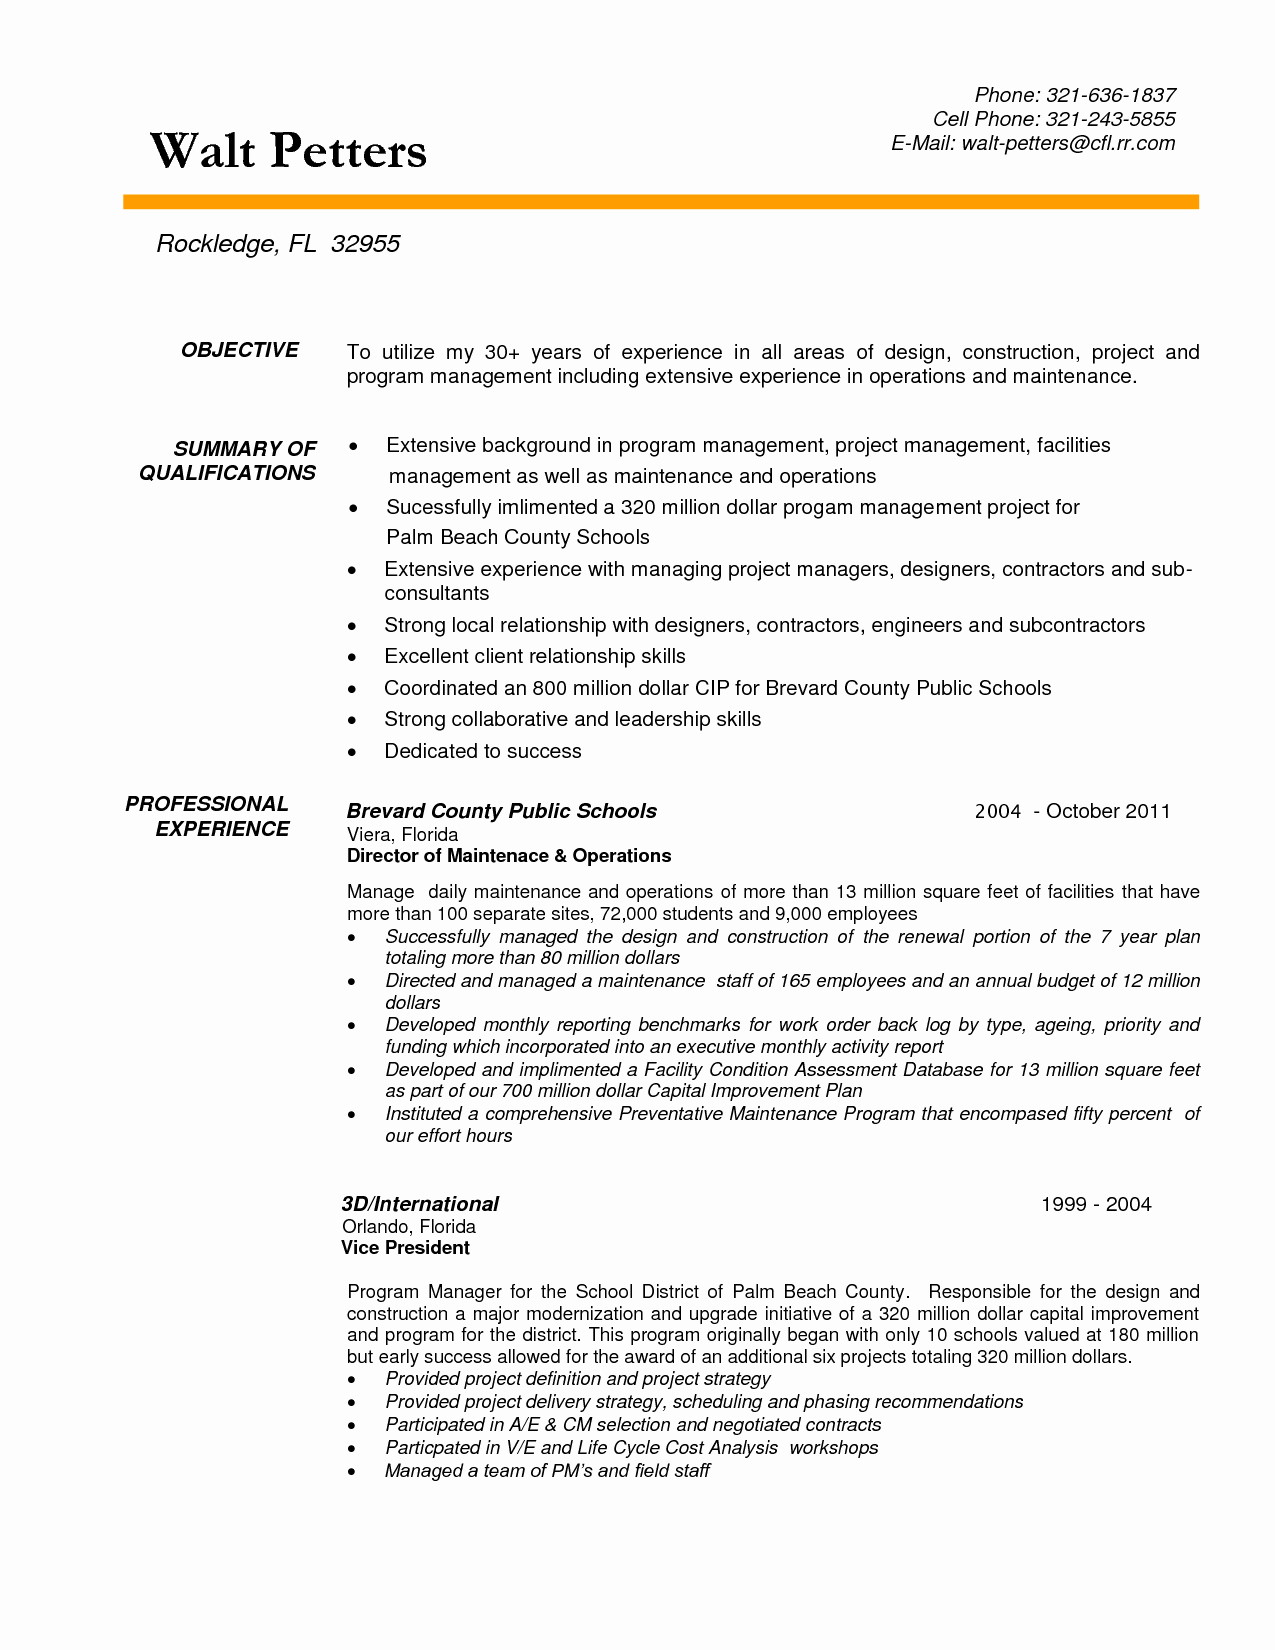 Construction Manager Resume